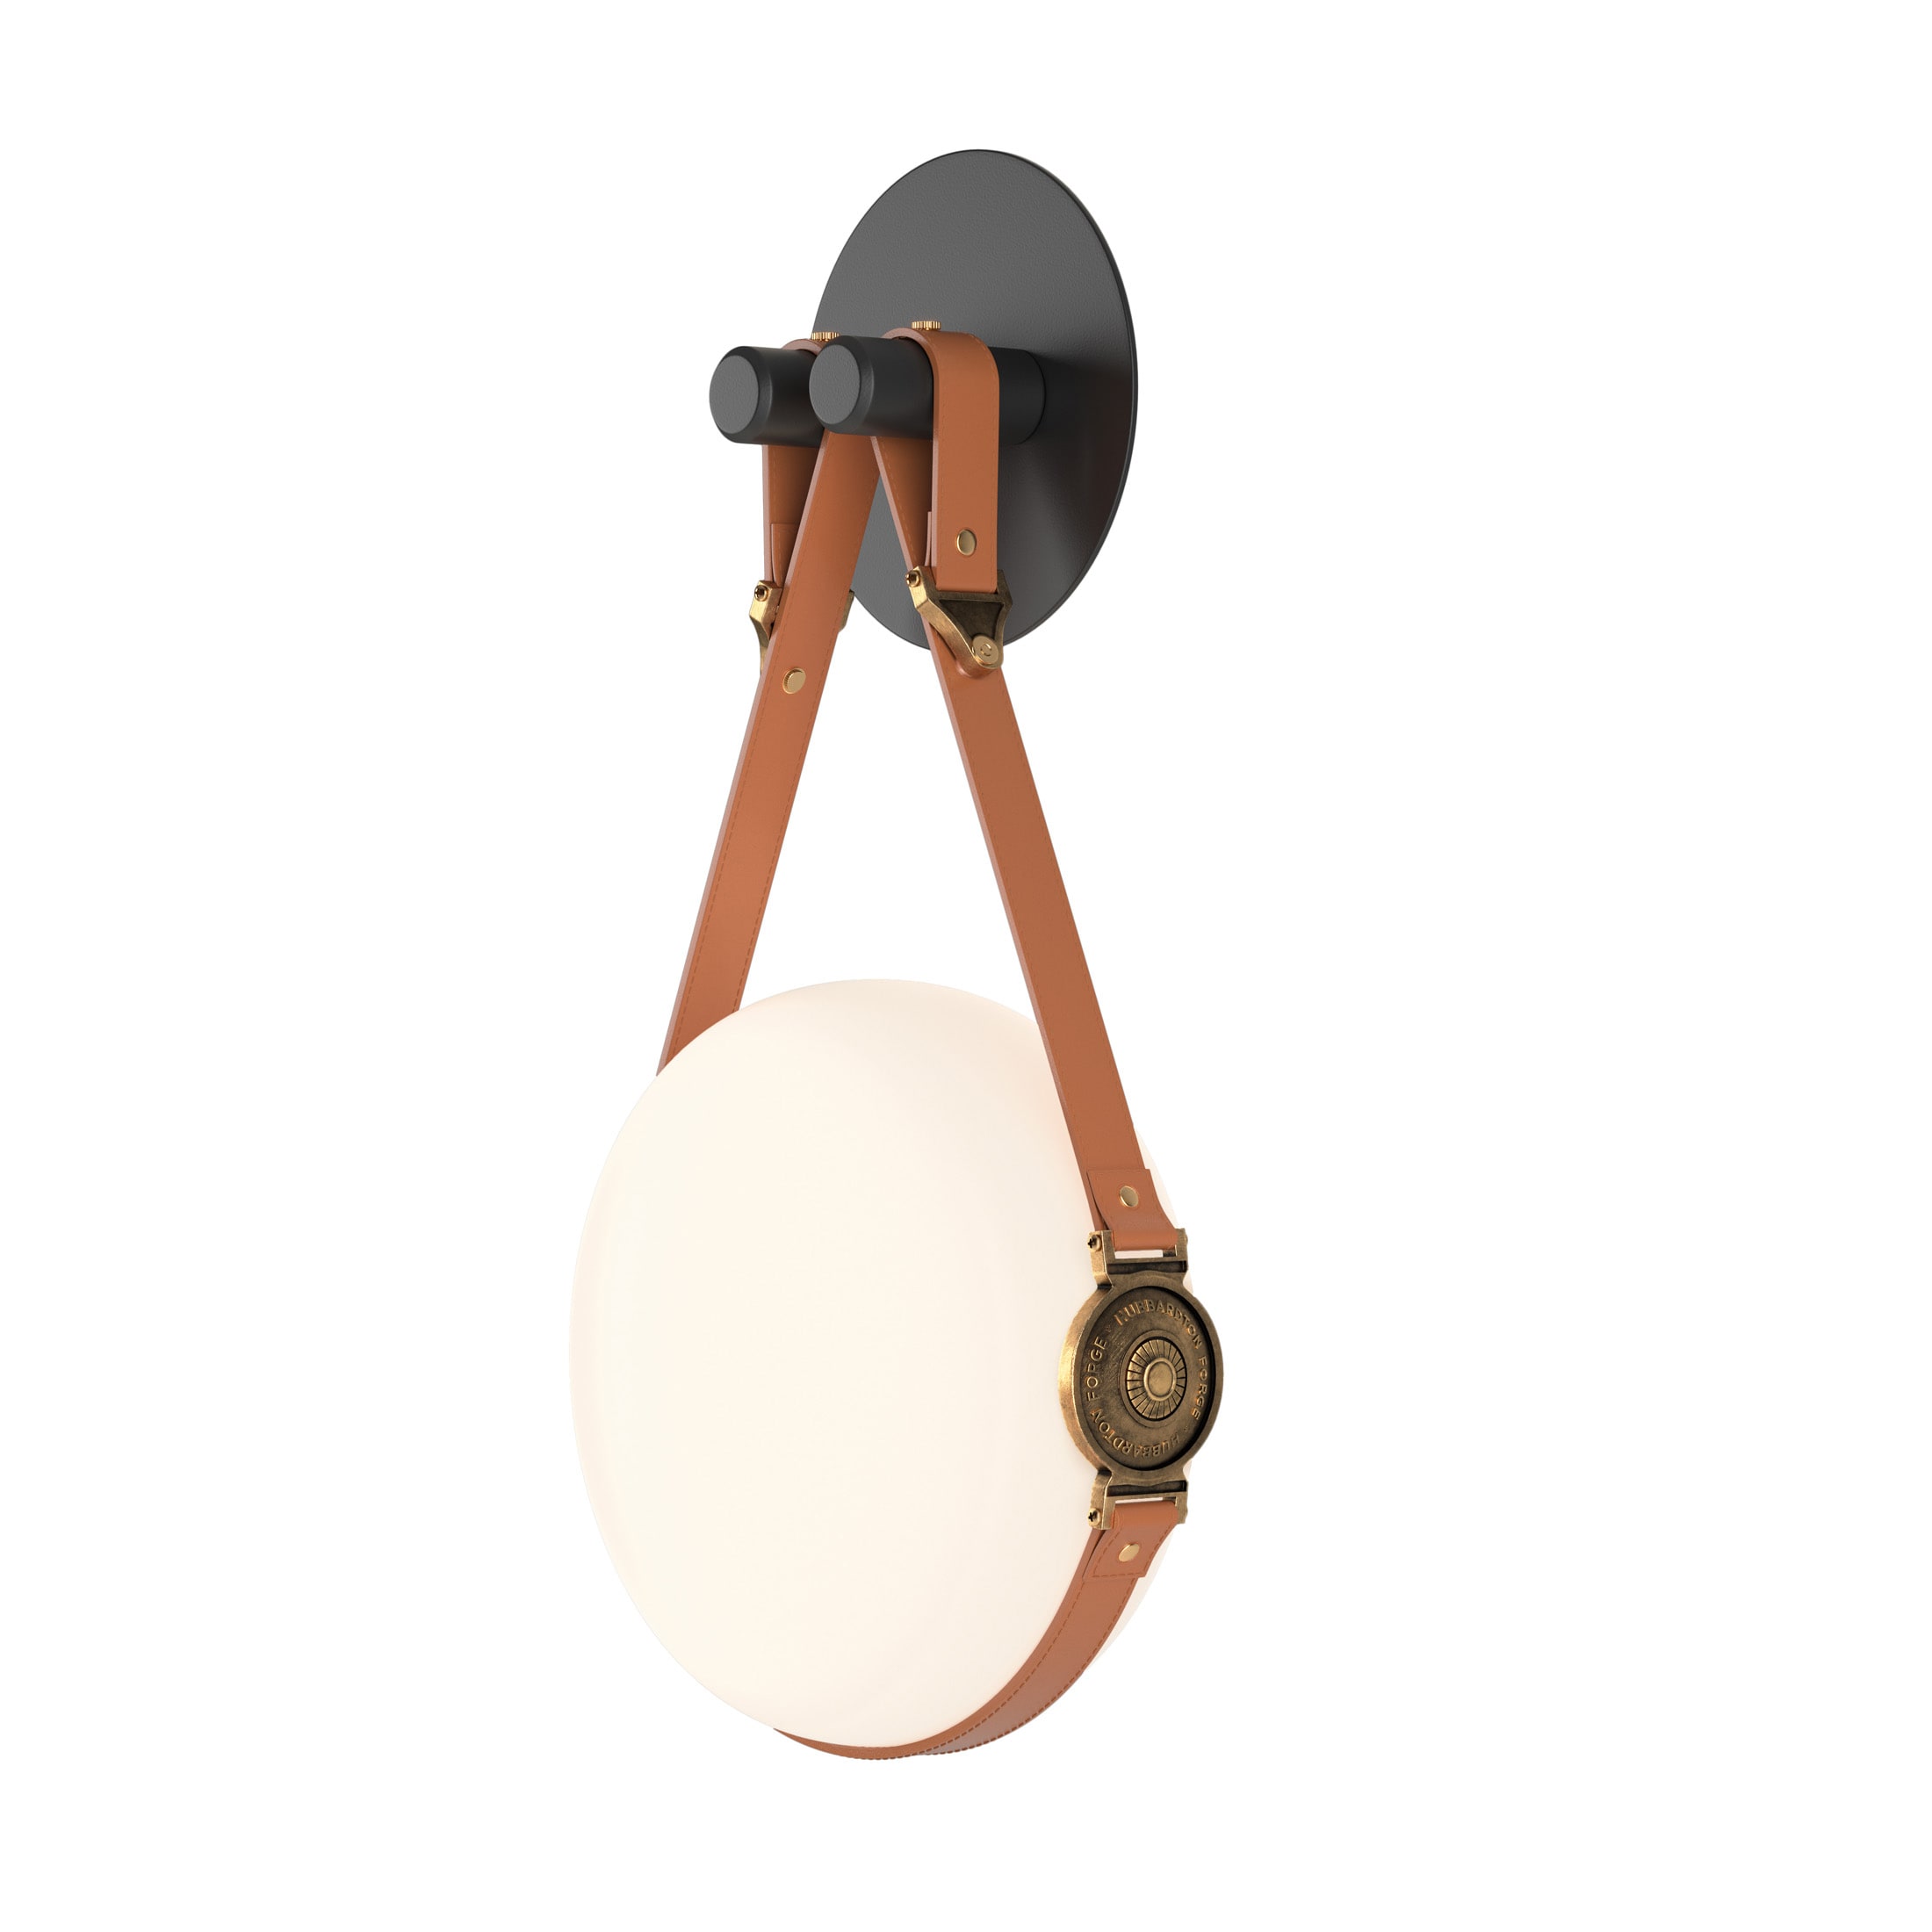 Hubbardton Forge 201030-LED-10-27-LC-HF-GG0672 Brass / Black Derby 21" LED Wall Sconce with Opal Shade and Chestnut Accents - LightingDirect.com